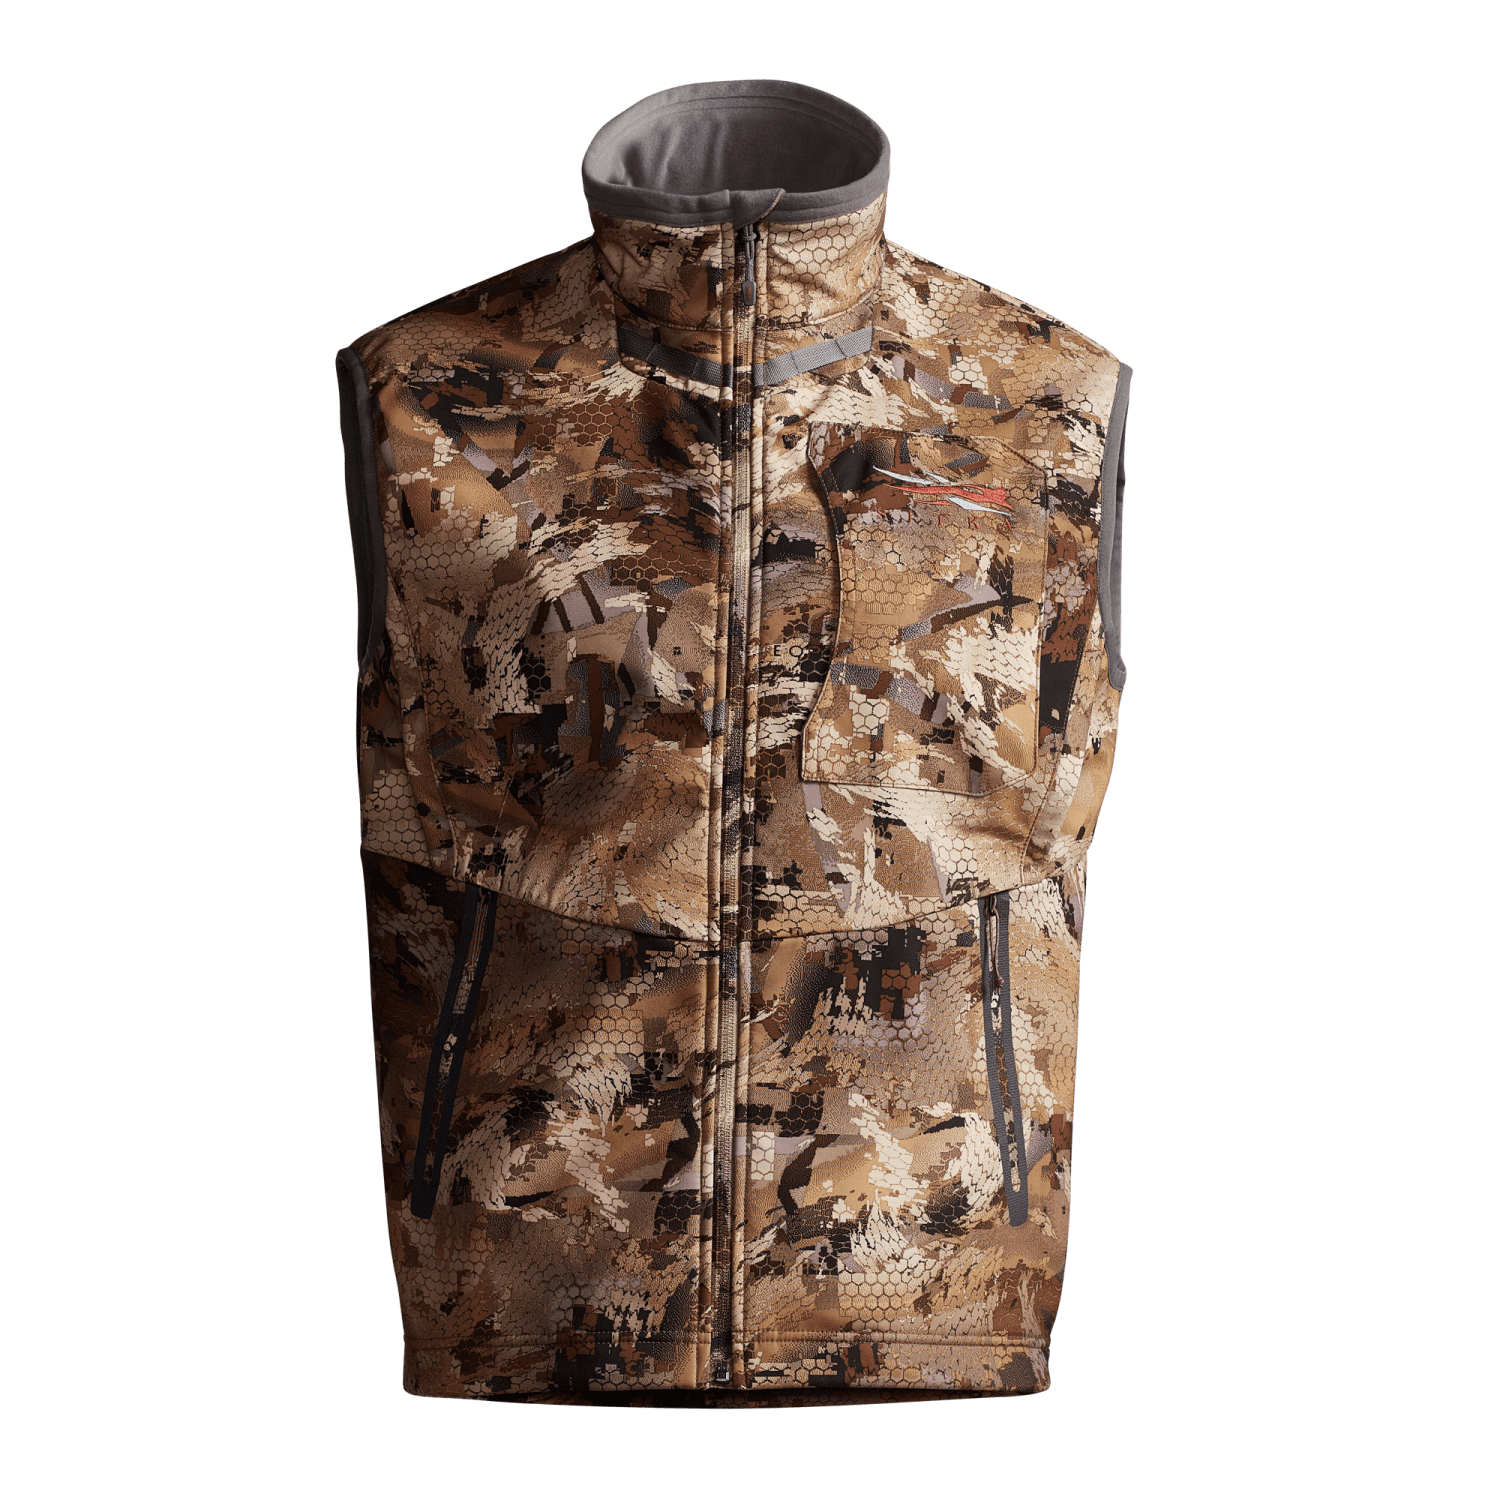 Sitka, Vest, Hunting, Clothing, Waterfowl